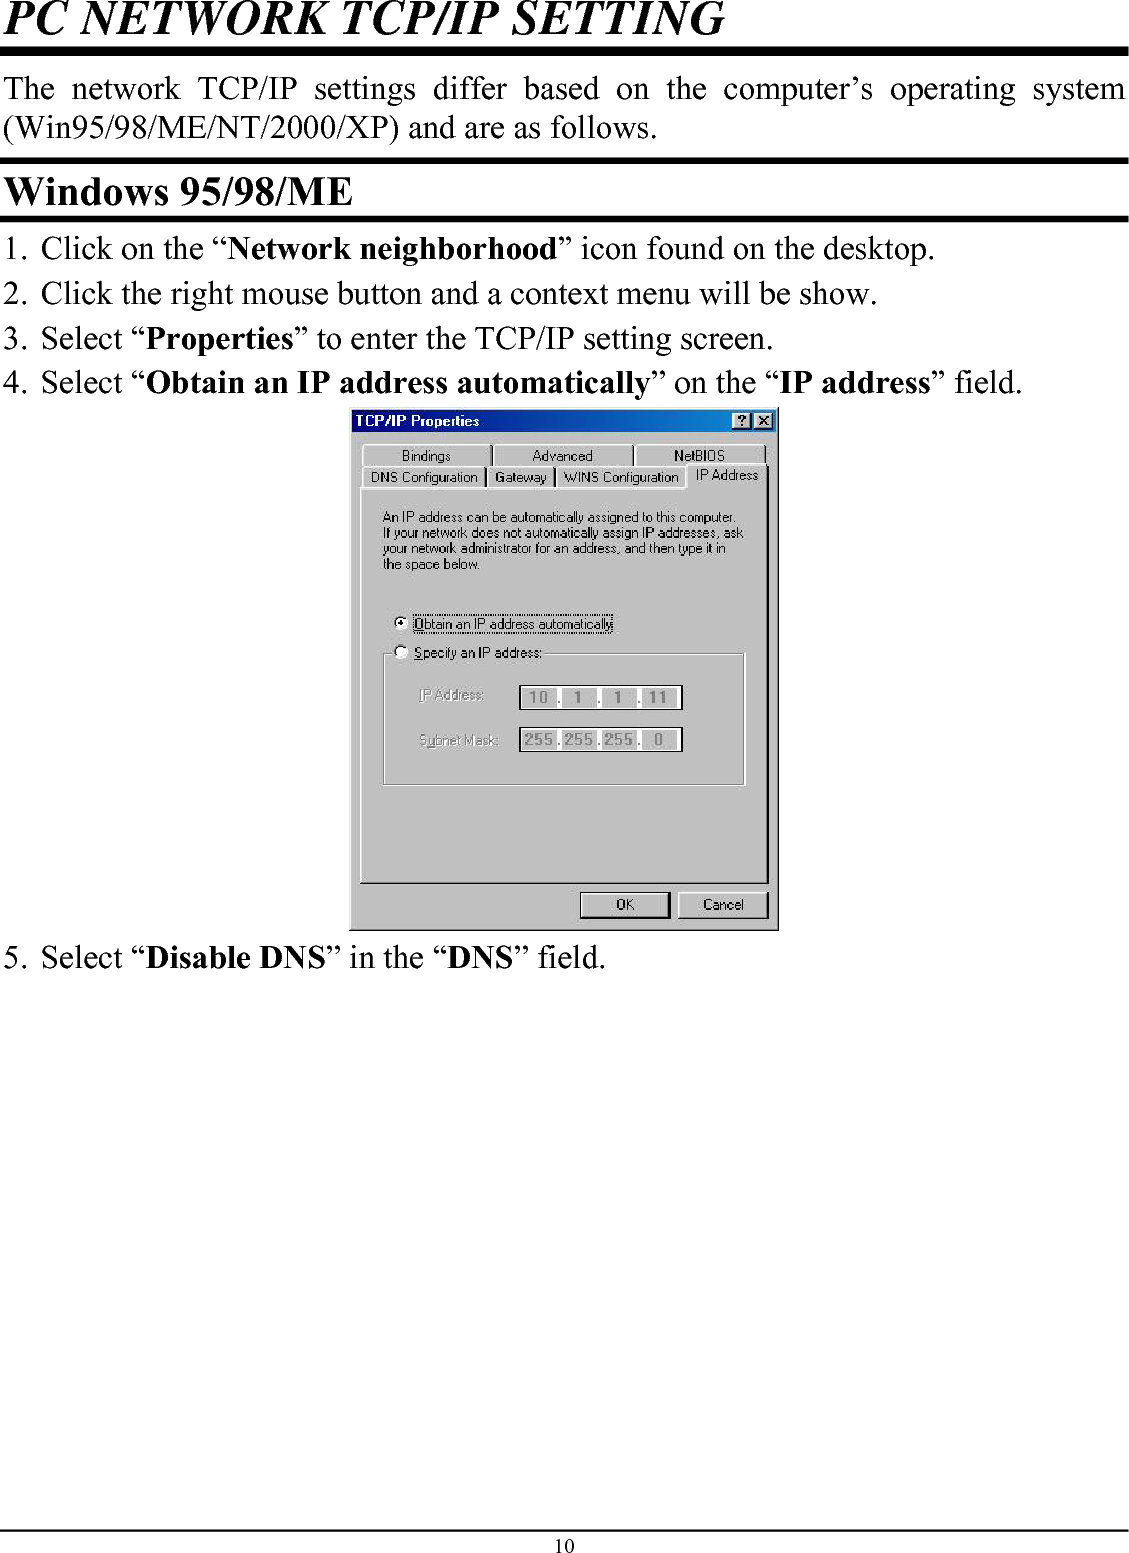 10 PC NETWORK TCP/IP SETTING The network TCP/IP settings differ based on the computer’s operating system (Win95/98/ME/NT/2000/XP) and are as follows. Windows 95/98/ME 1. Click on the “Network neighborhood” icon found on the desktop.  2. Click the right mouse button and a context menu will be show.  3. Select “Properties” to enter the TCP/IP setting screen.  4. Select “Obtain an IP address automatically” on the “IP address” field.  5. Select “Disable DNS” in the “DNS” field. 